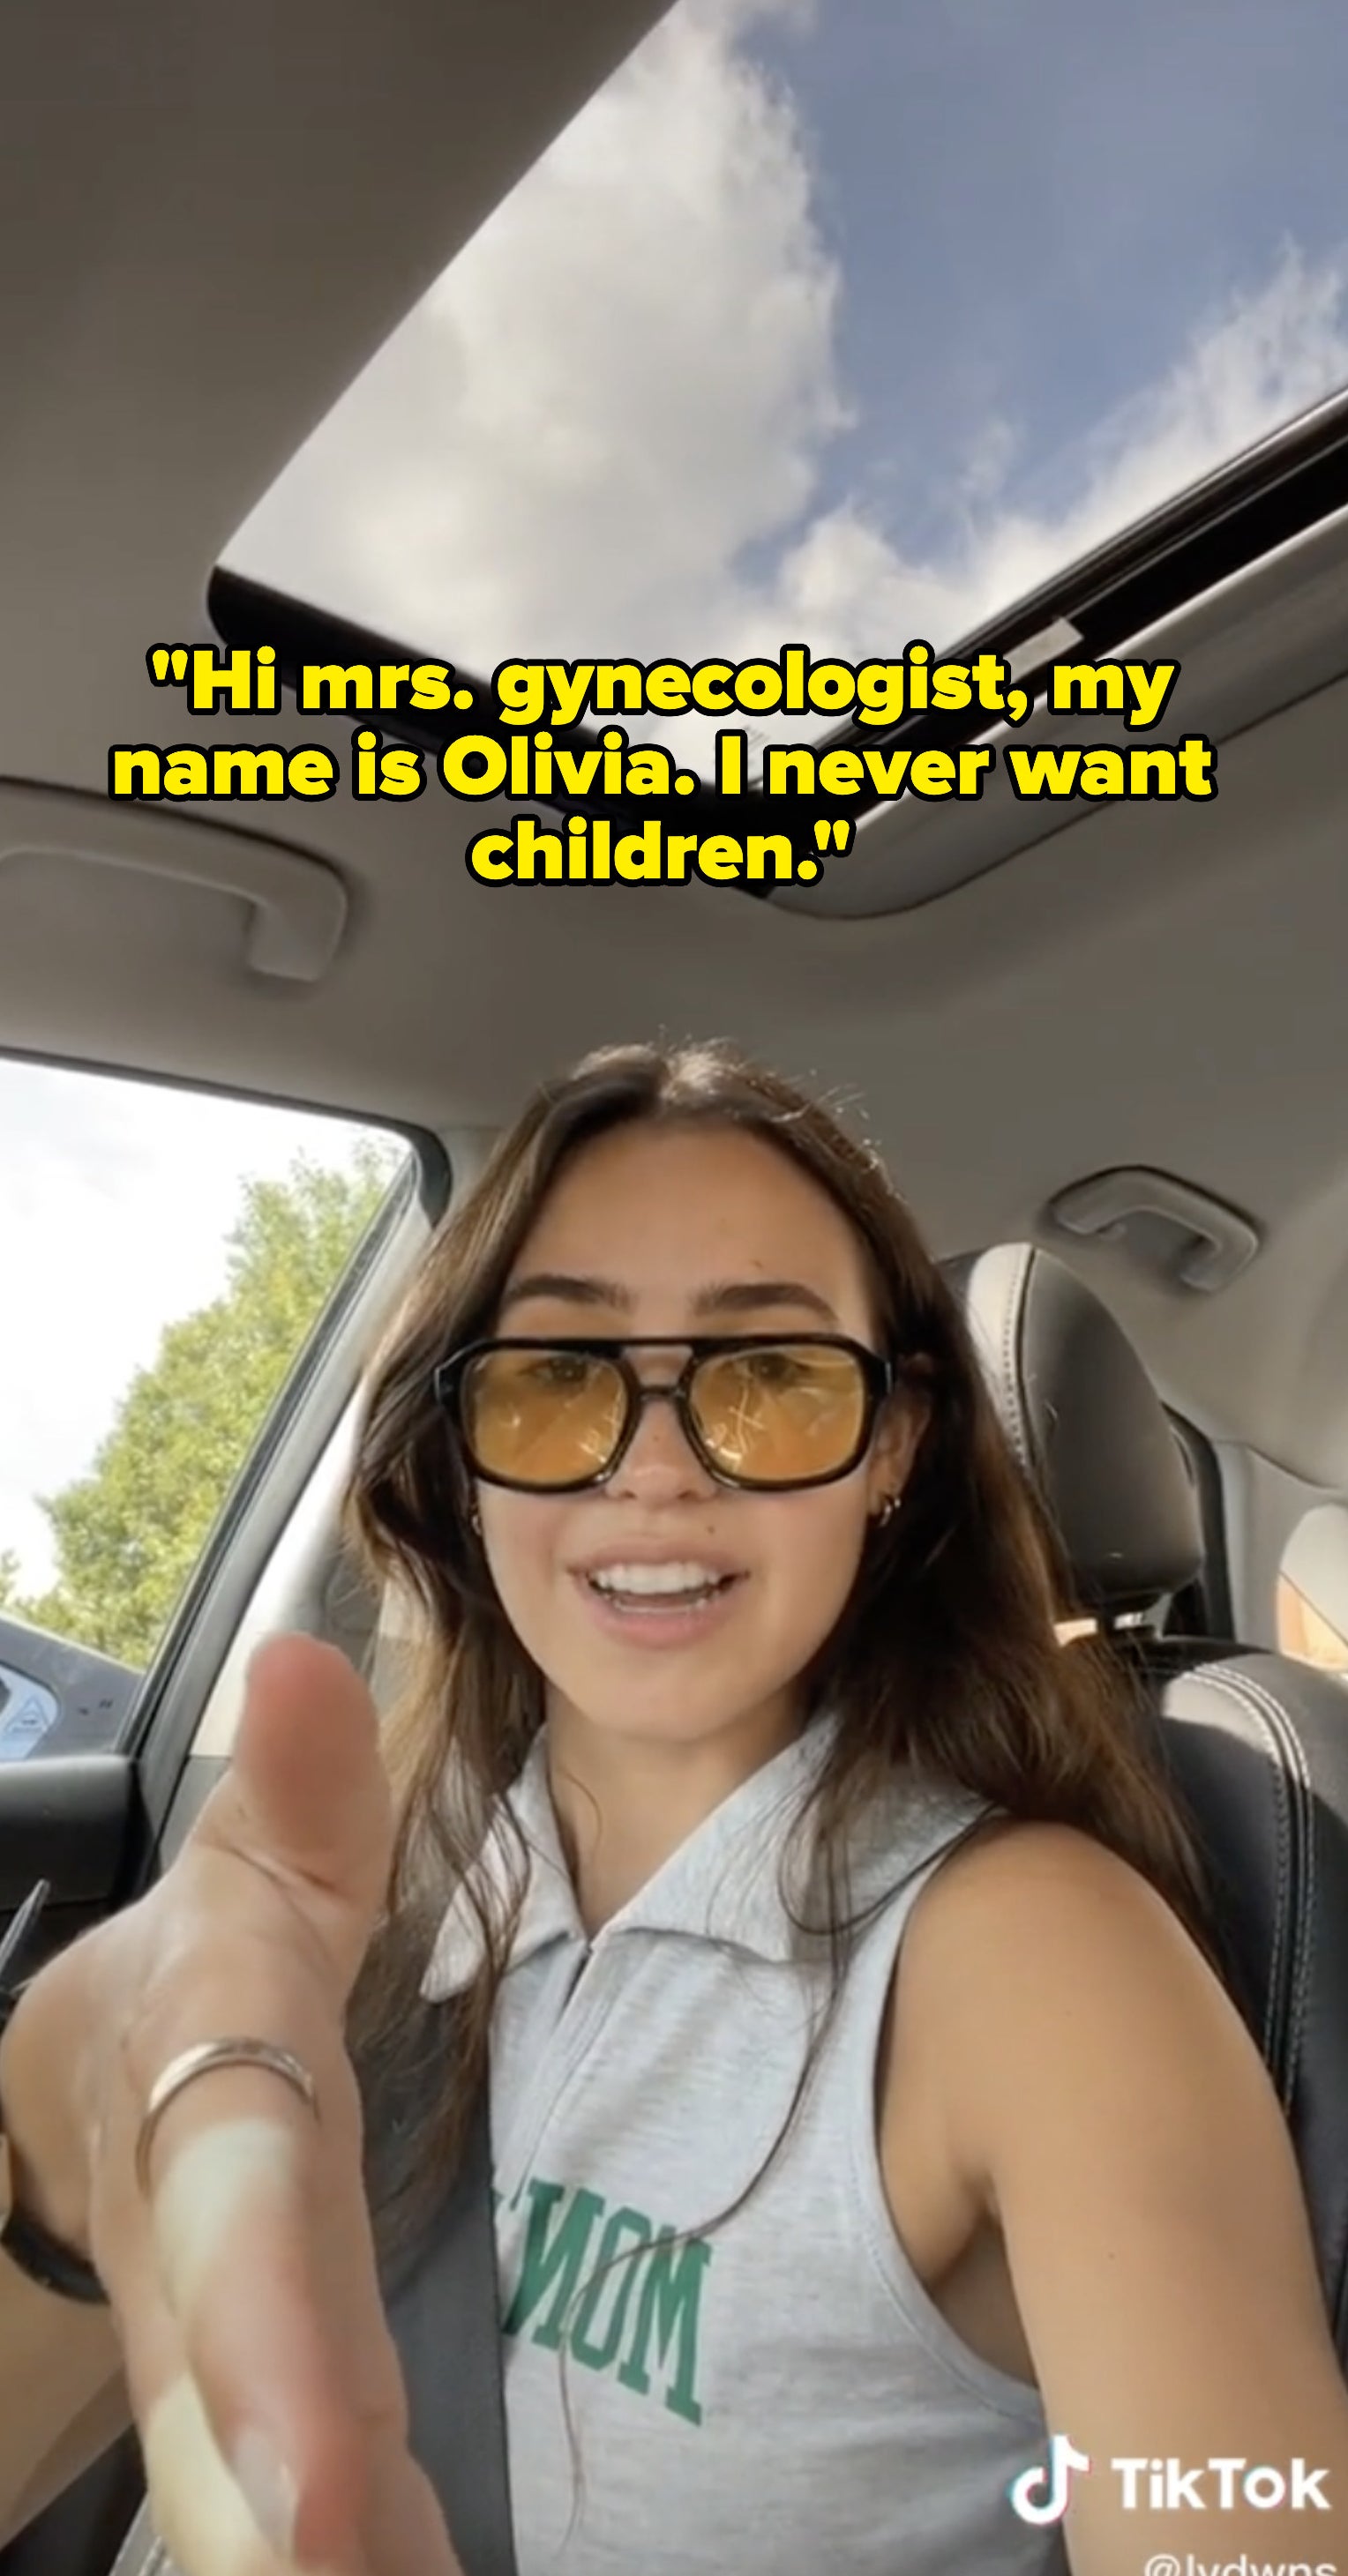 Olivia&#x27;s re-creation of the conversation, in which she says &quot;Hi Mrs. gynecologist, my name is Olivia, I never want children&quot;